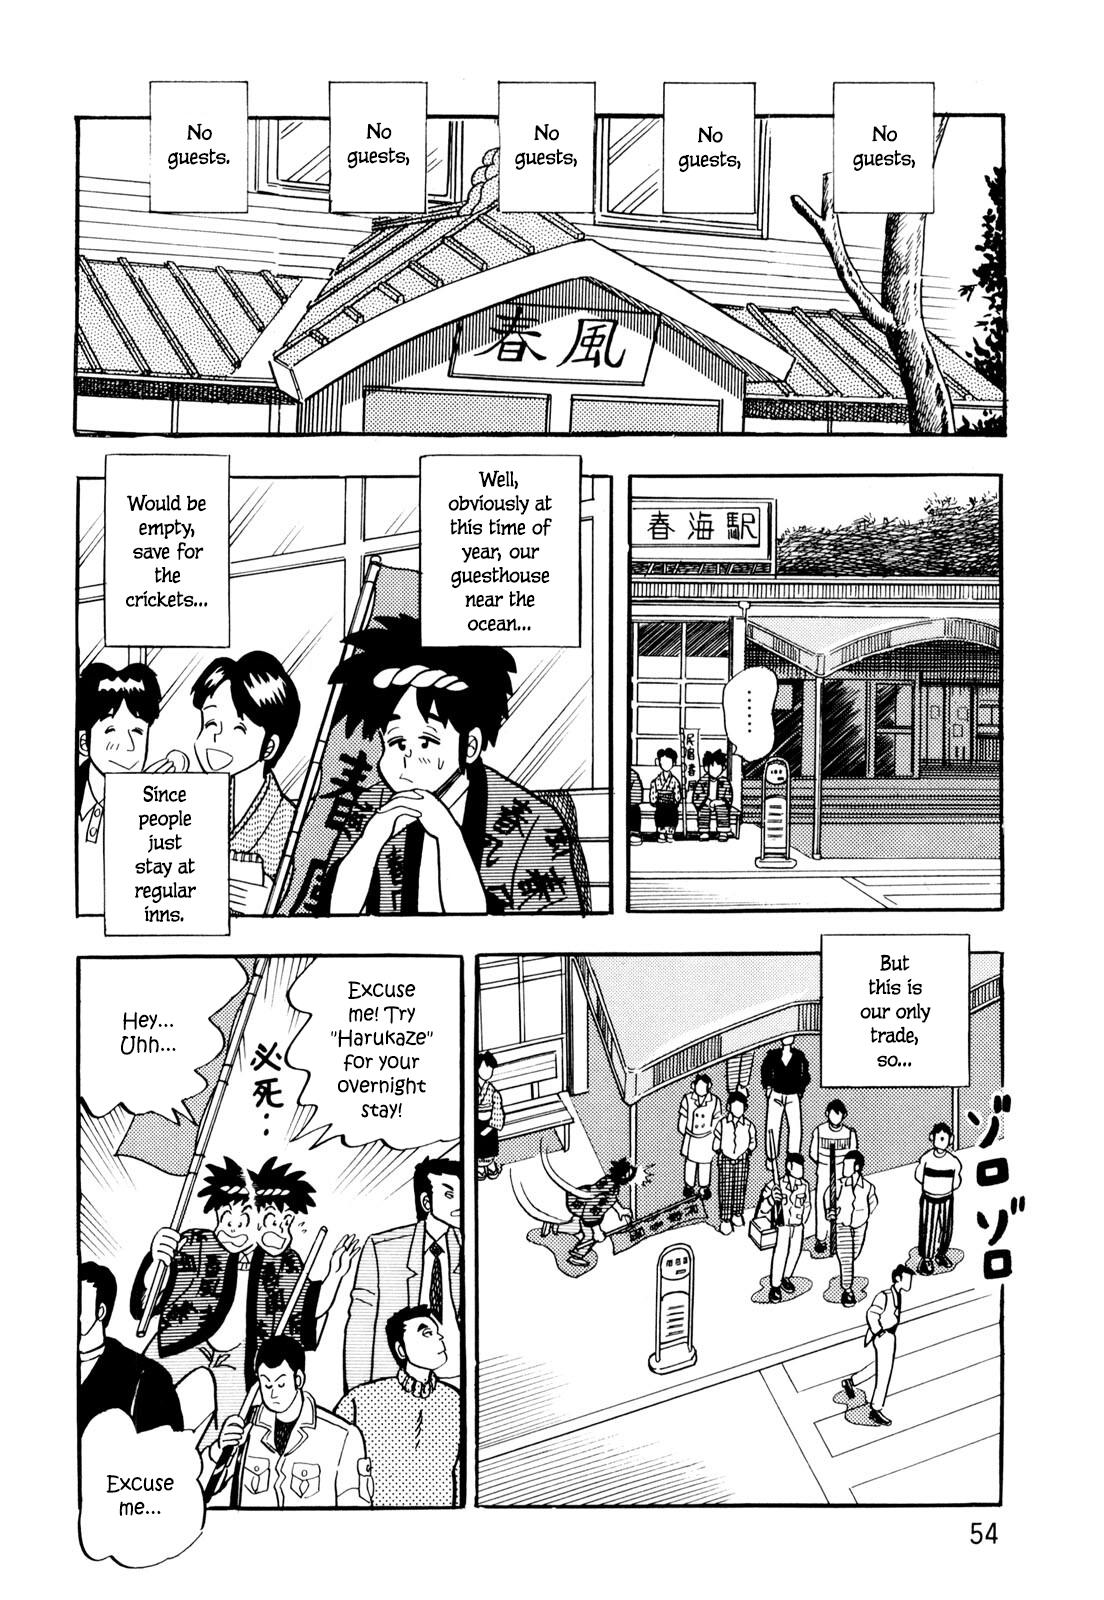 Welcome To Harukaze - A Mahjong Guesthouse Story Vol.1 Chapter 3 - Picture 2